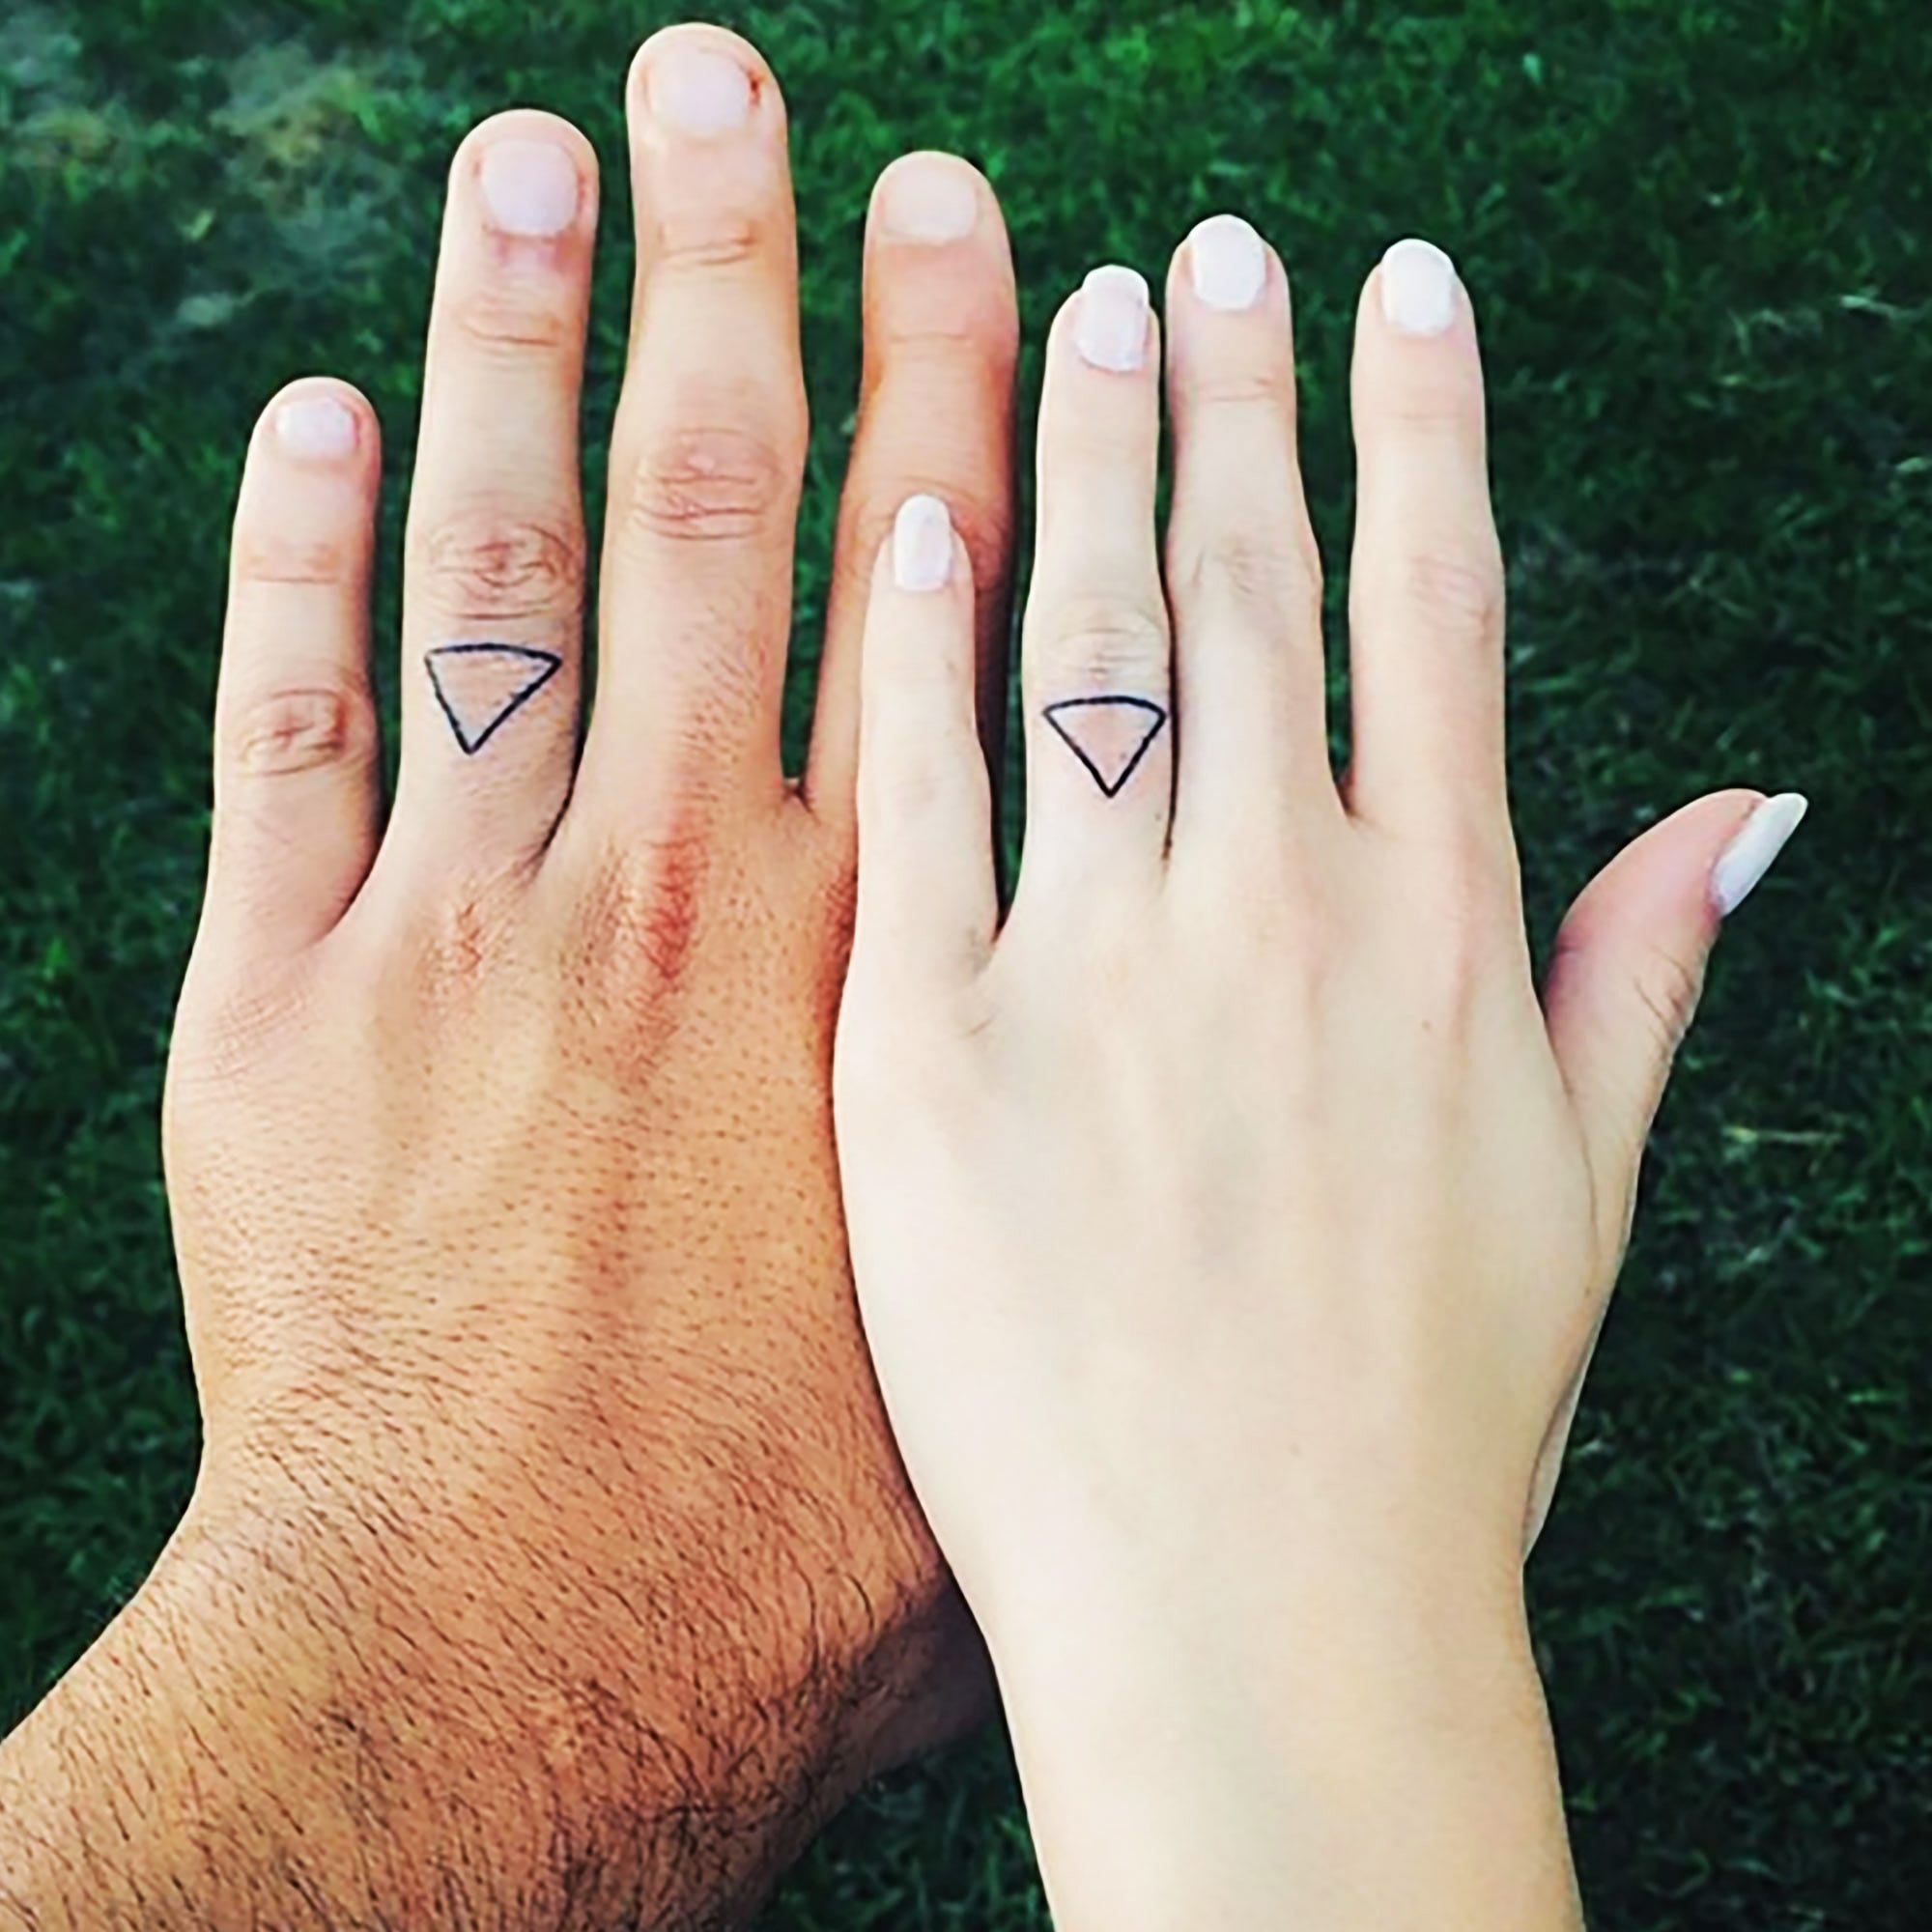 61 Non-cliché Small Tattoos For Couple - Our Mindful Life